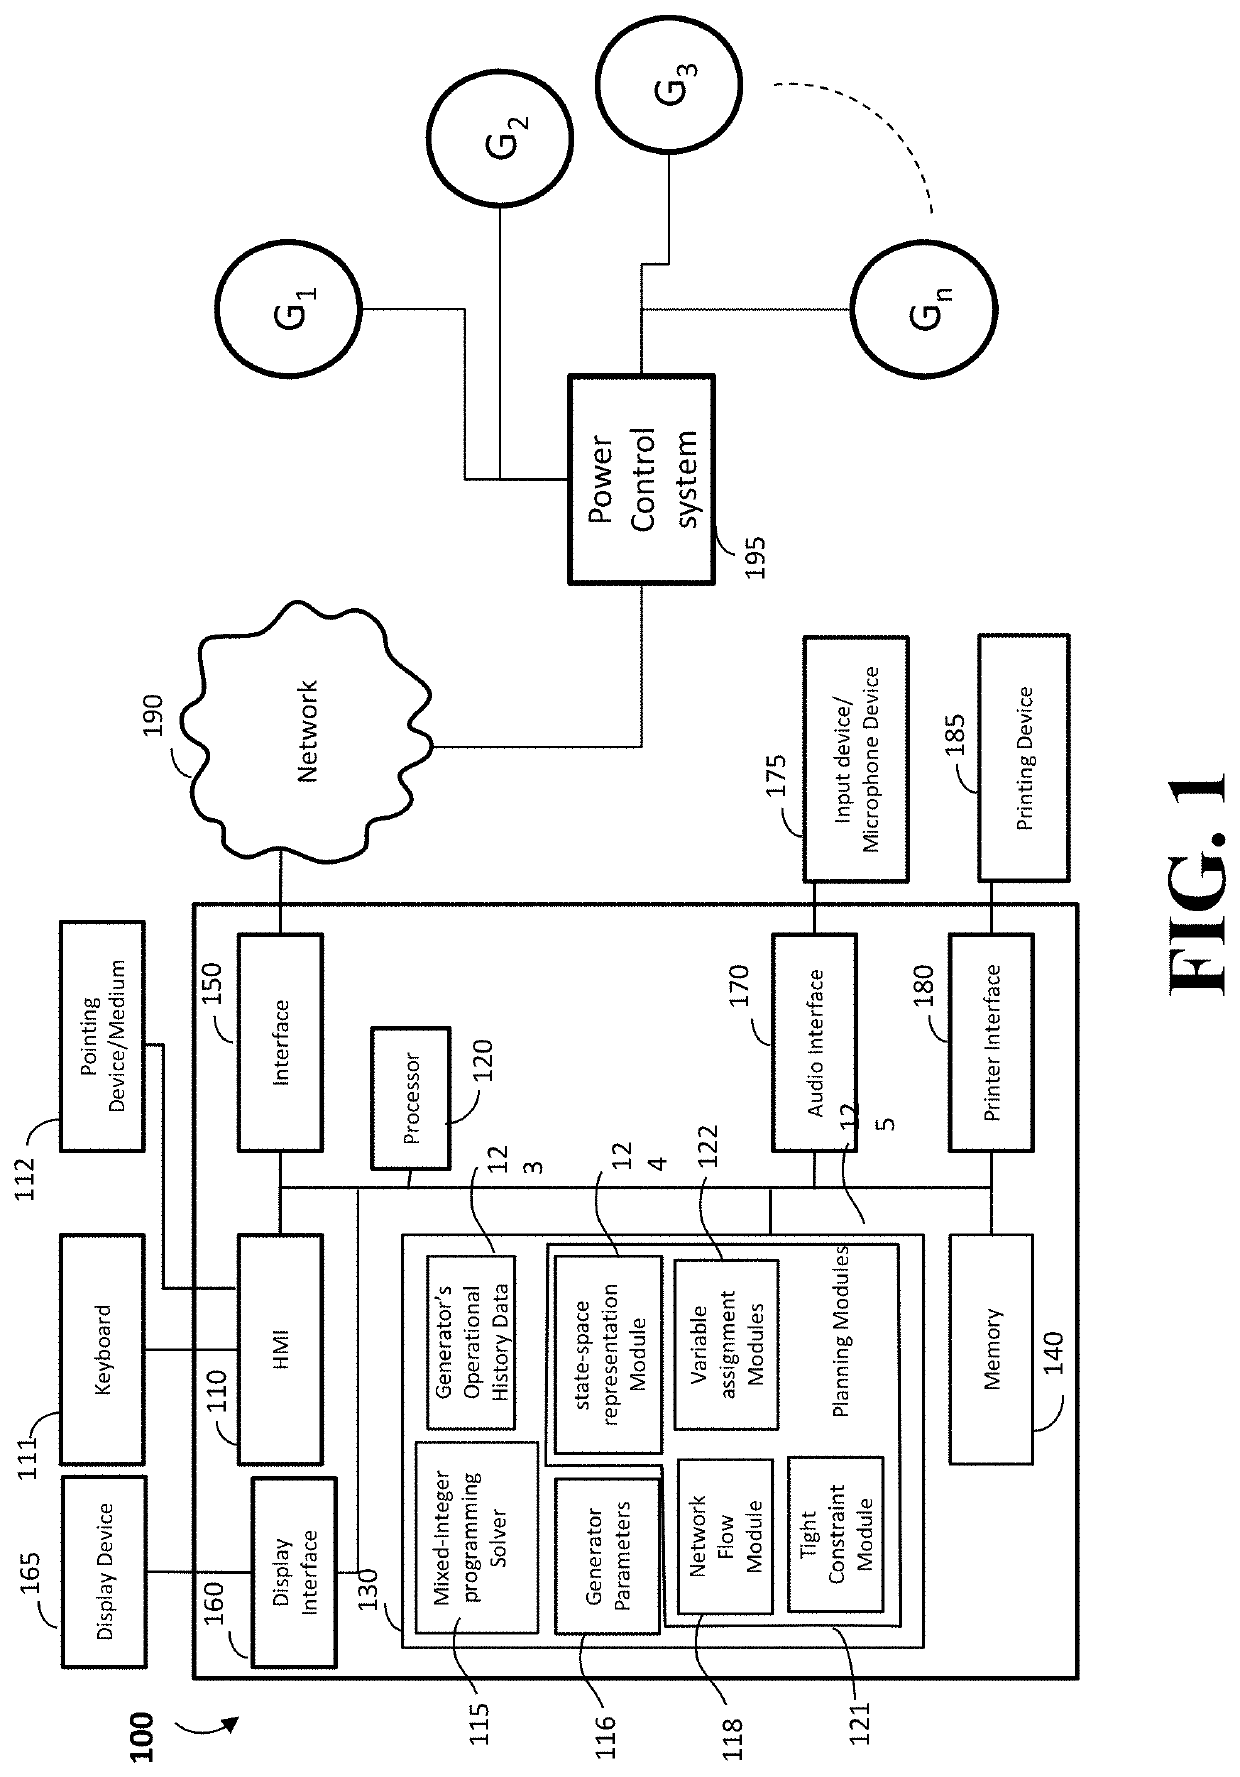 System and Method for Scheduling Electric Generators using Decision Diagrams